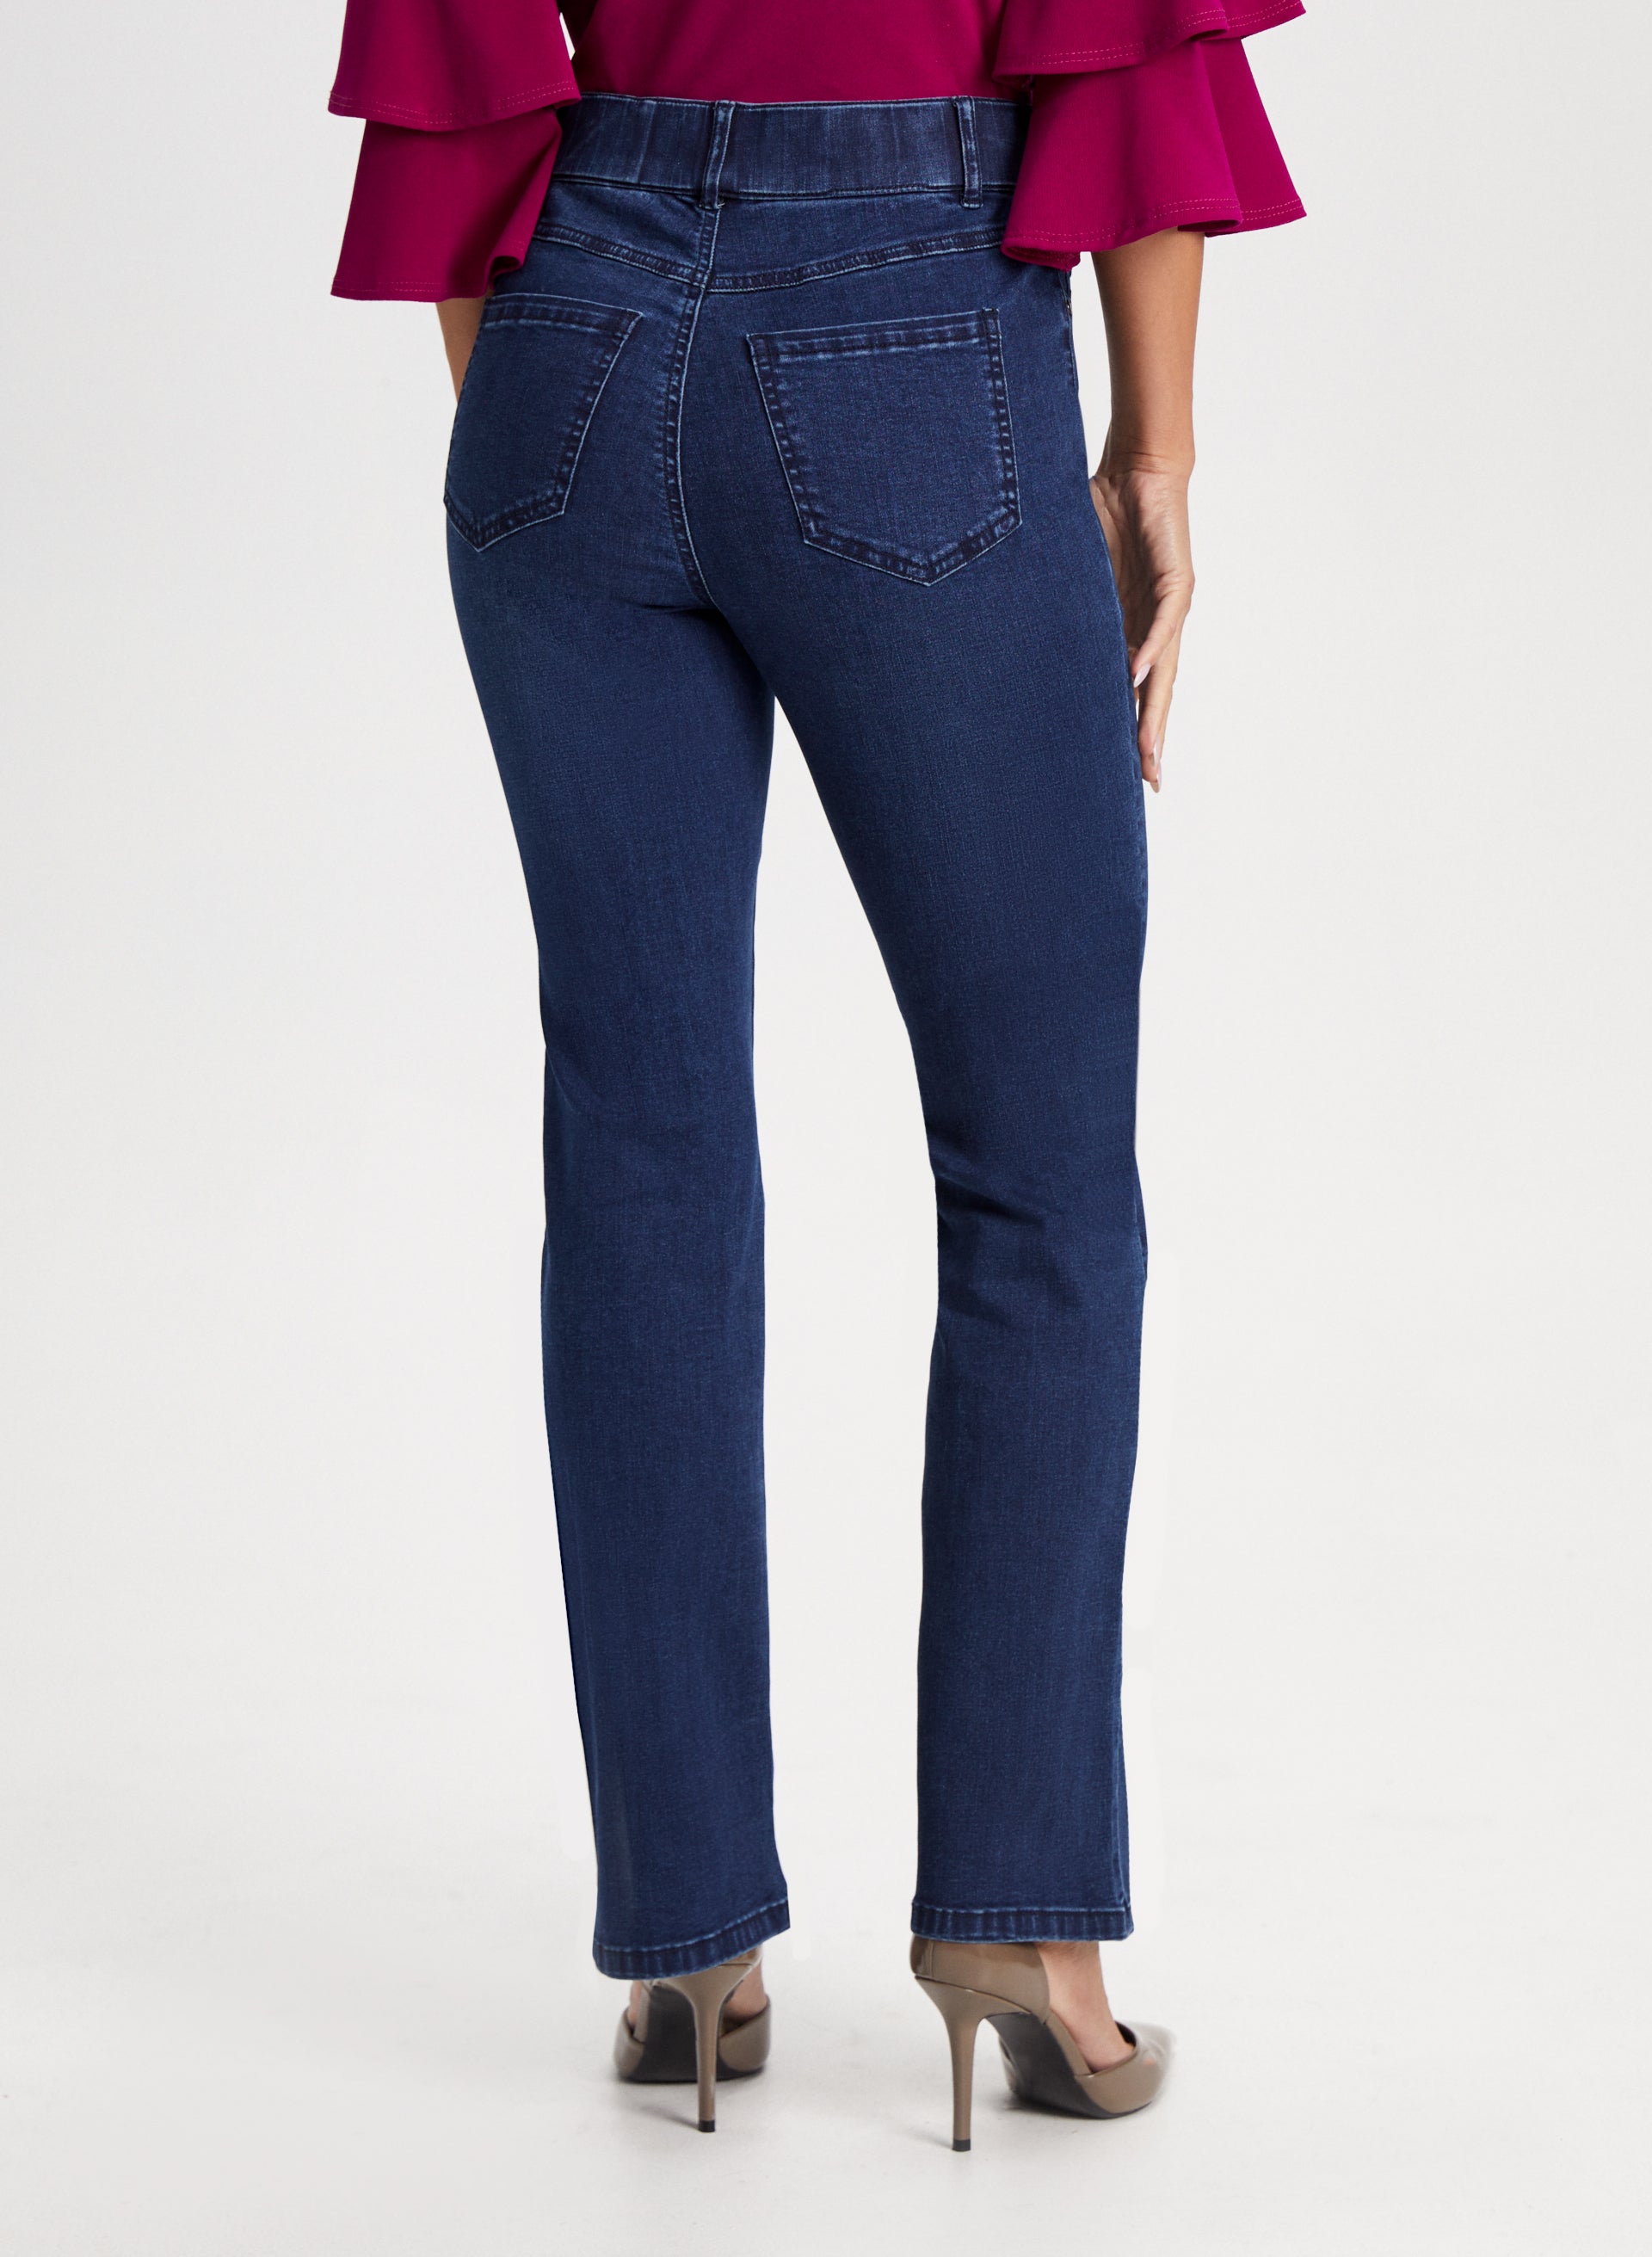 Buy Navy Blue High Rise Bootcut Jeans Online